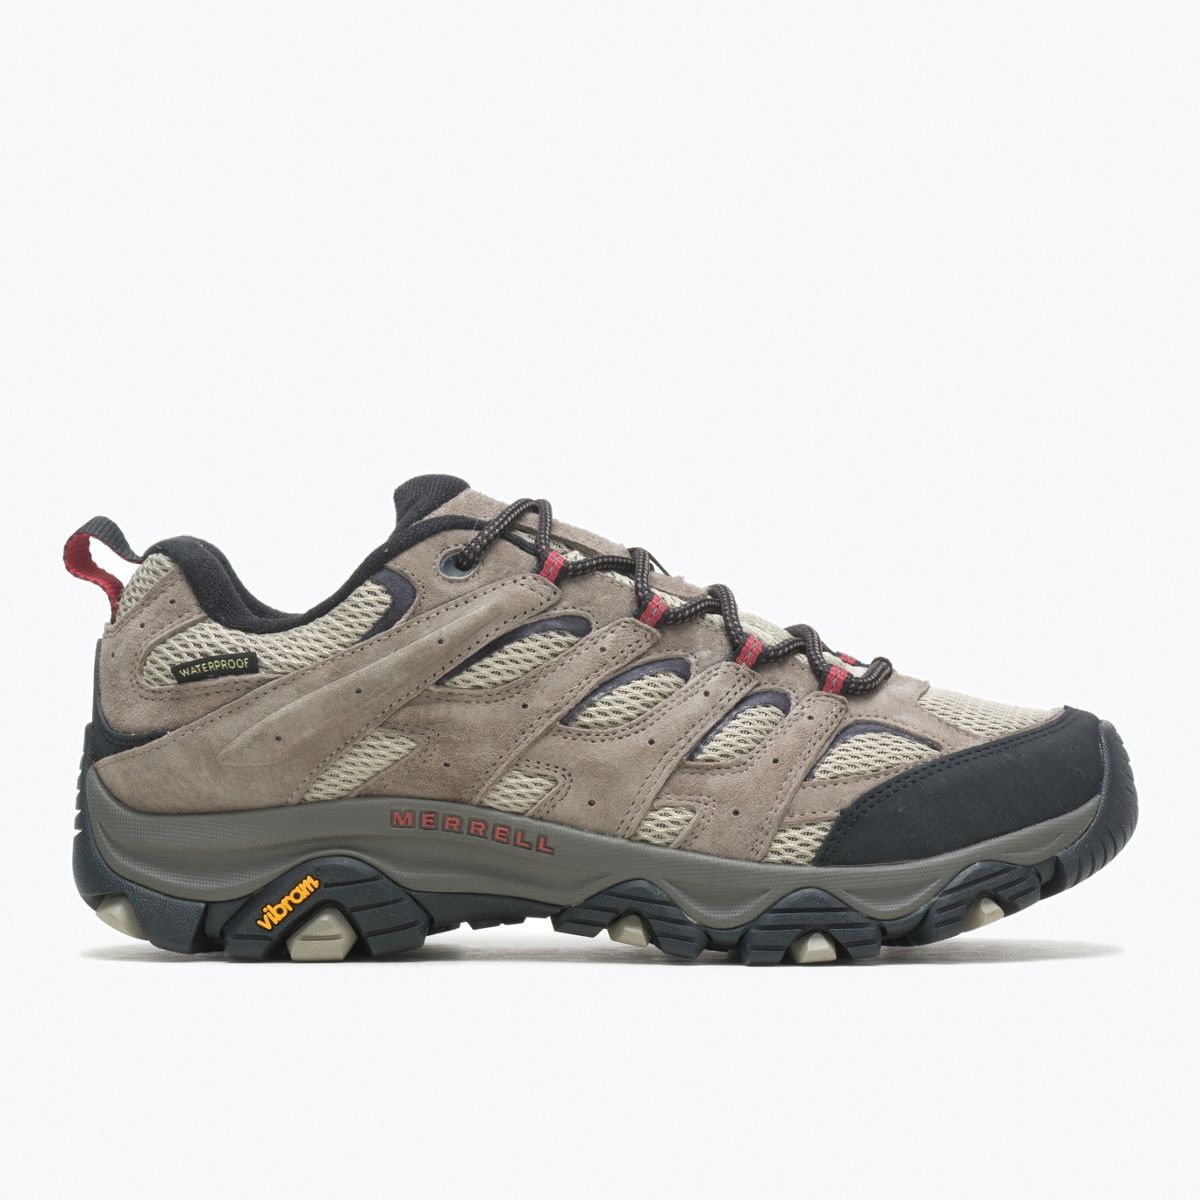 Merrell Moab 3 GORE-TEX, review y opiniones, Desde 100,75 €